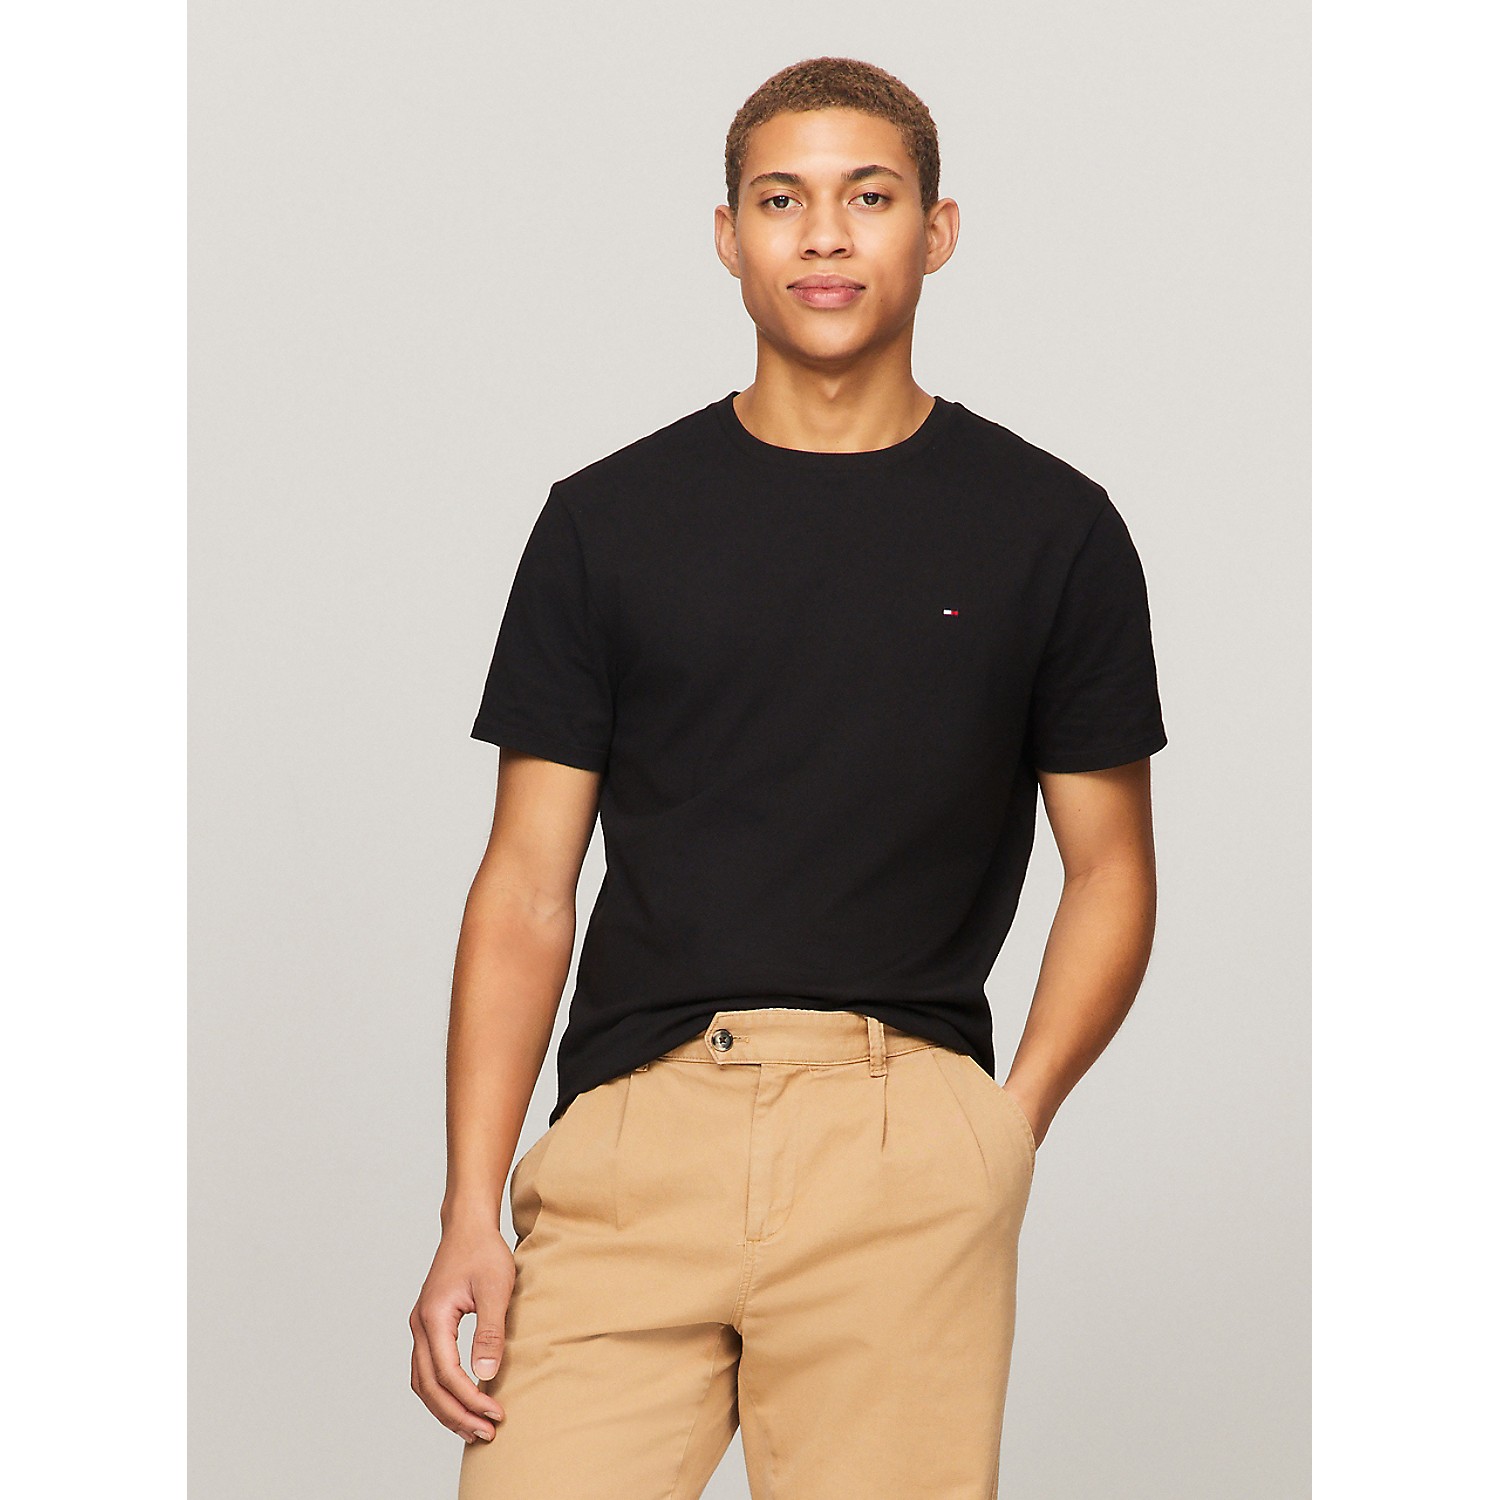 TOMMY HILFIGER Everyday Solid T-Shirt